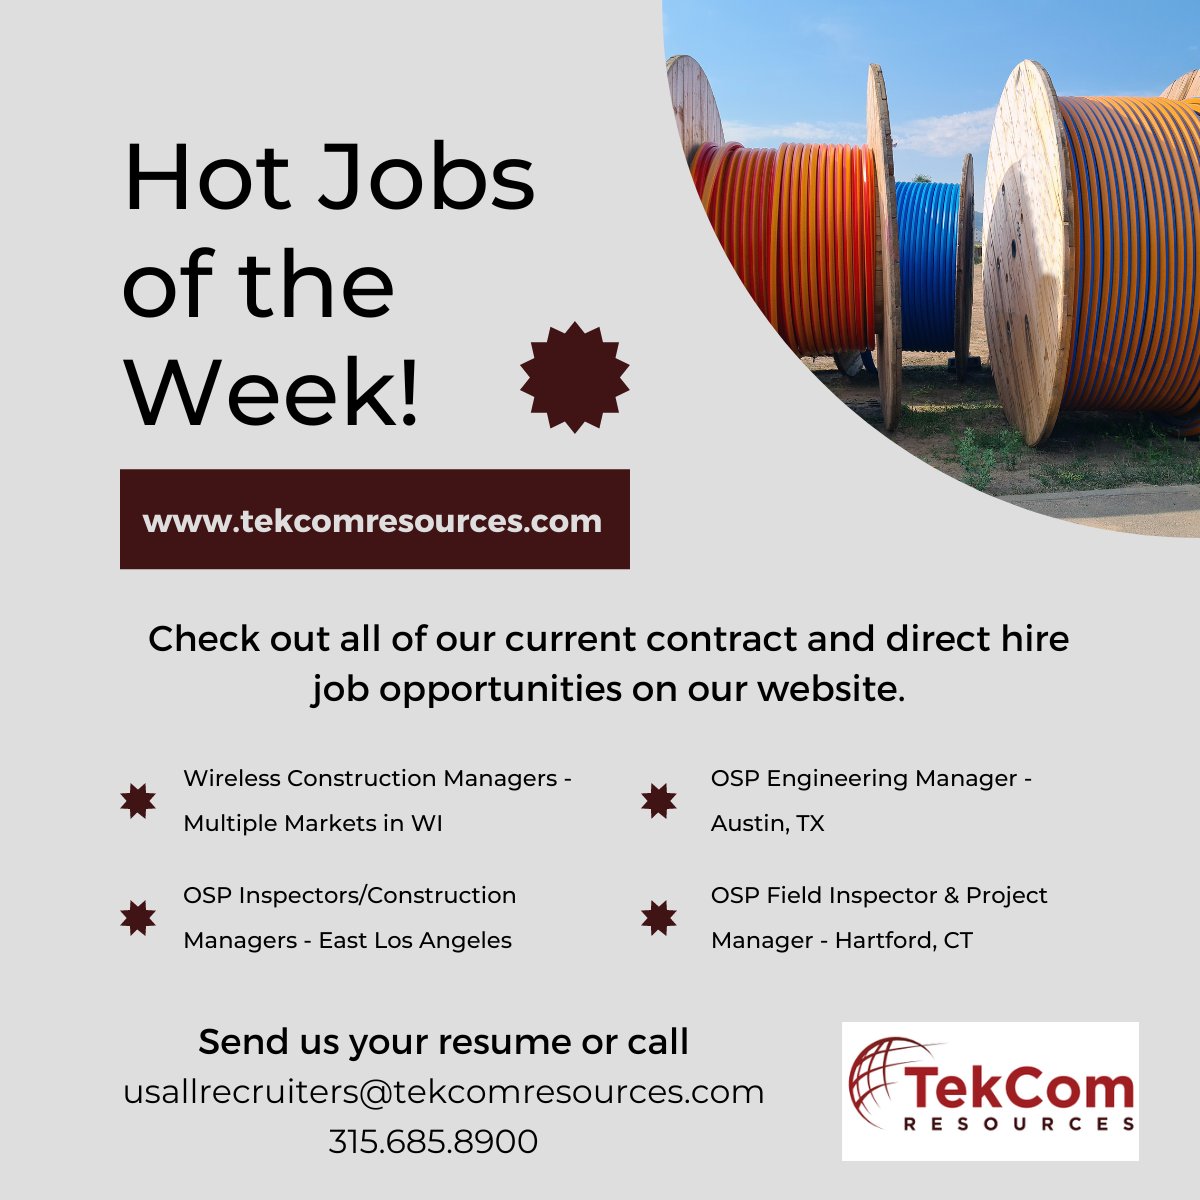 Looking for your next job opportunity? Here’s our Hot Jobs of the Week!

Call or send your resume today! You can find more information about these jobs and more at tekcomresources.catsone.com/careers. 

#tekcomjobs #wirelessconstruction #wisconsinjobs #fulltimejobs #contracttohirejobs